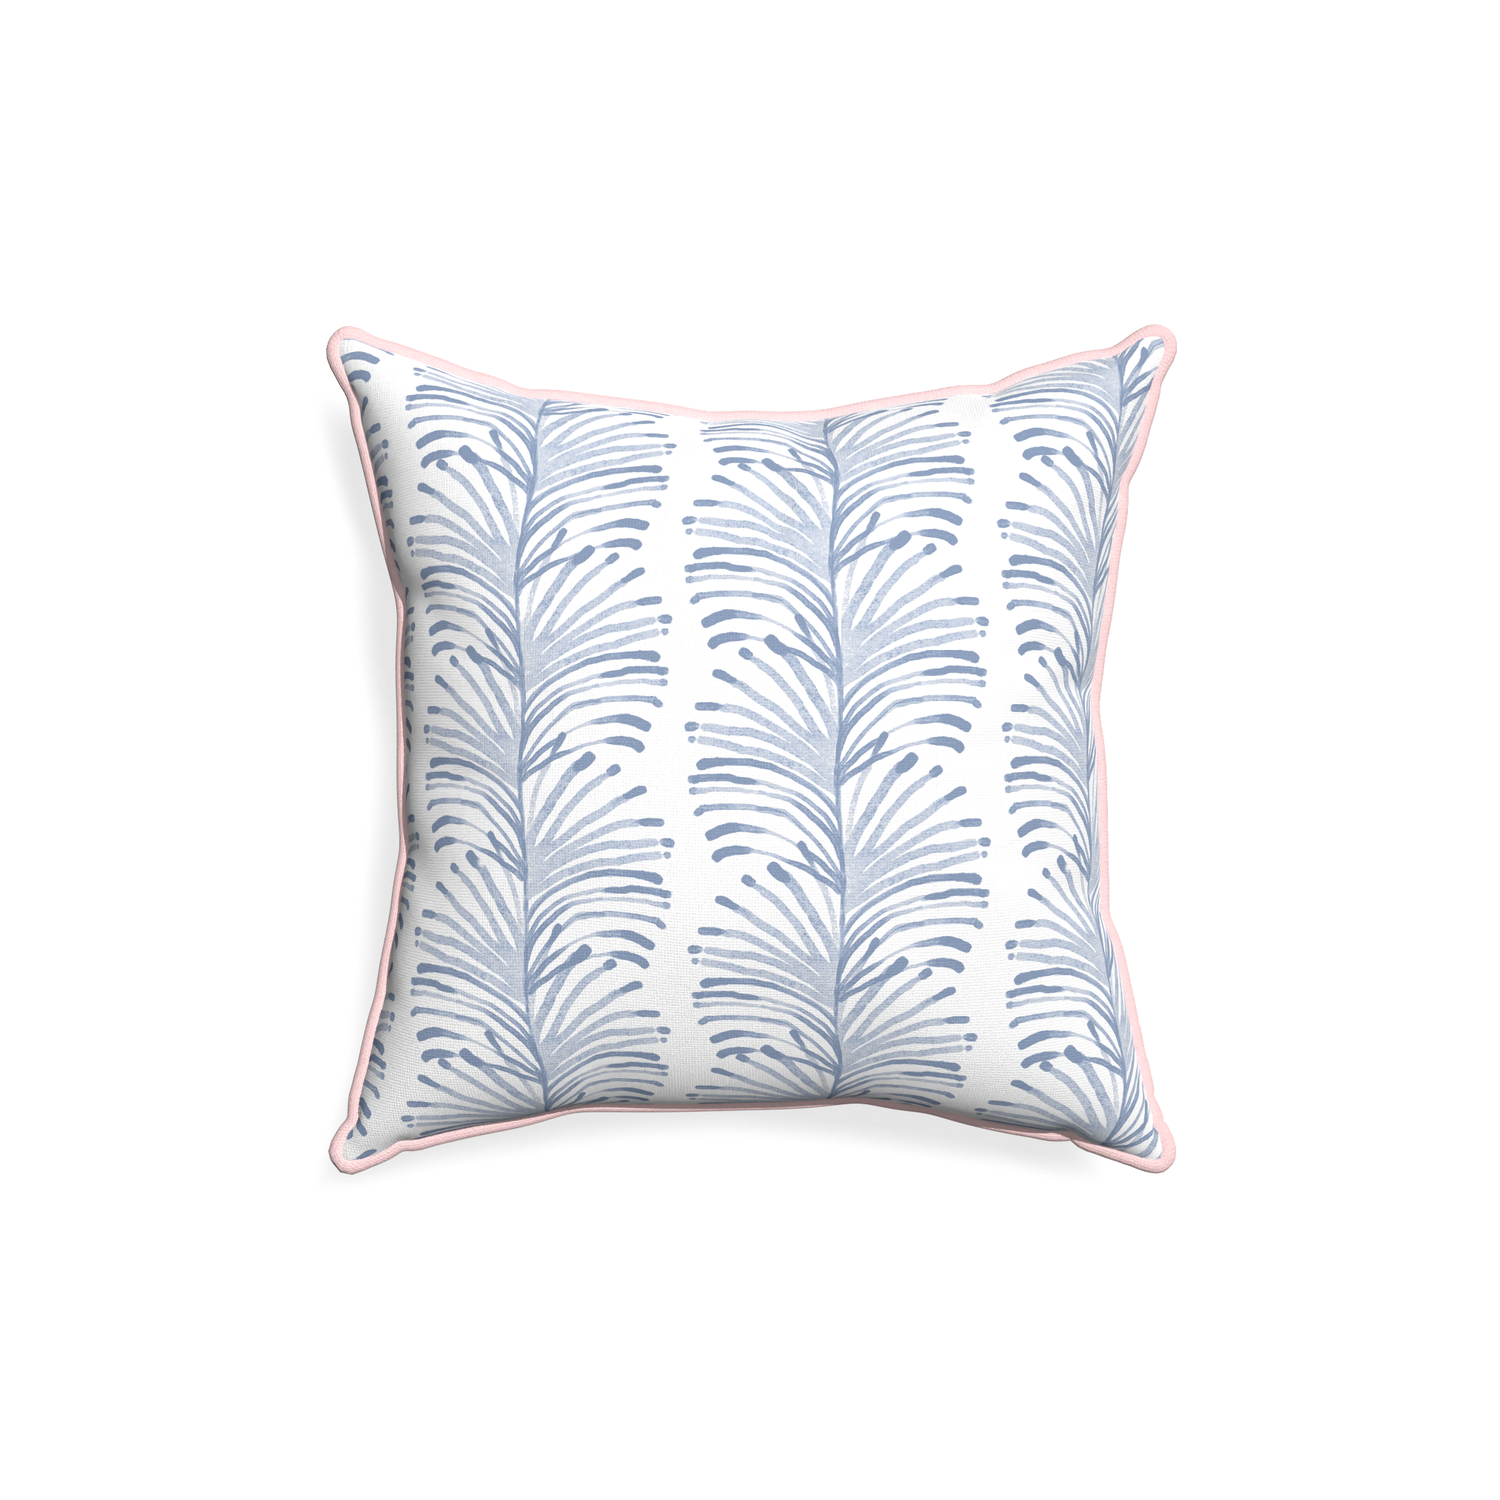 18-square emma sky custom sky blue botanical stripepillow with petal piping on white background